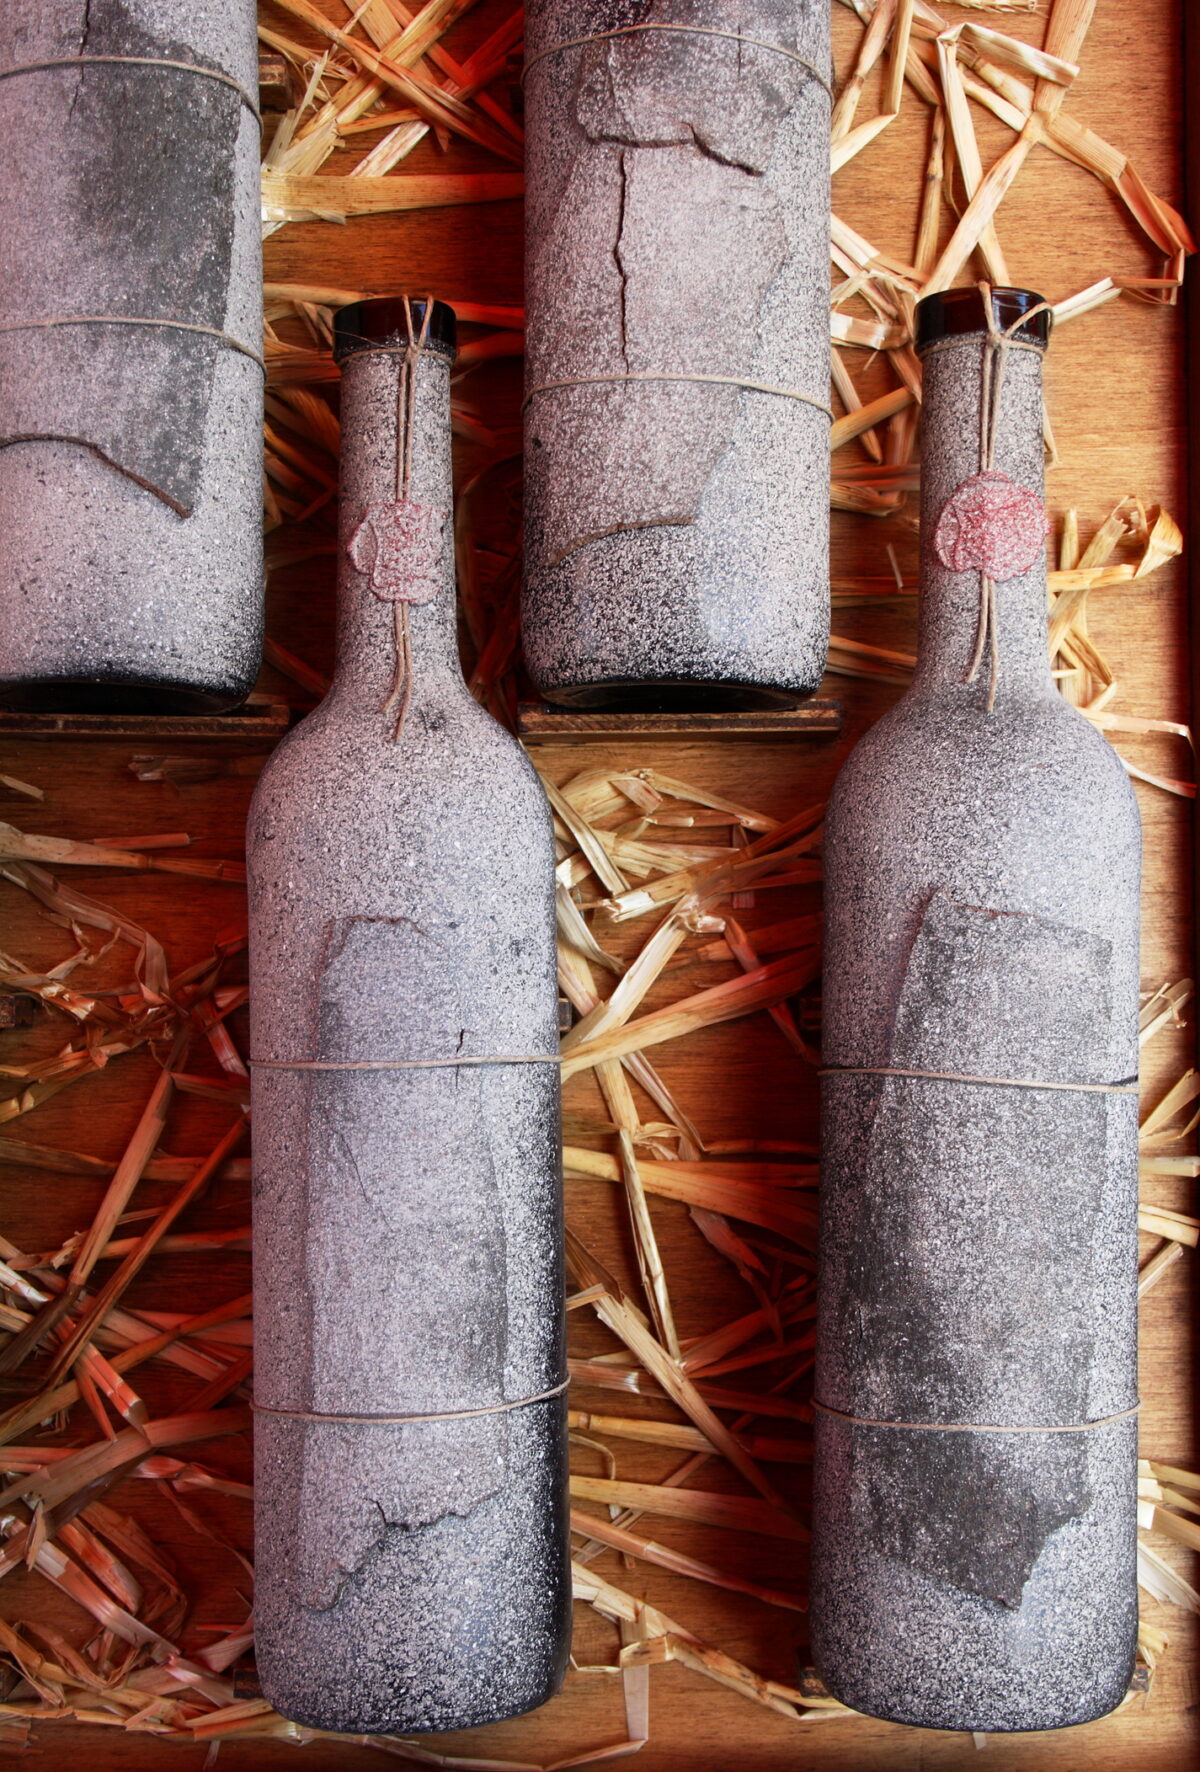 stone wine bottles in south africa